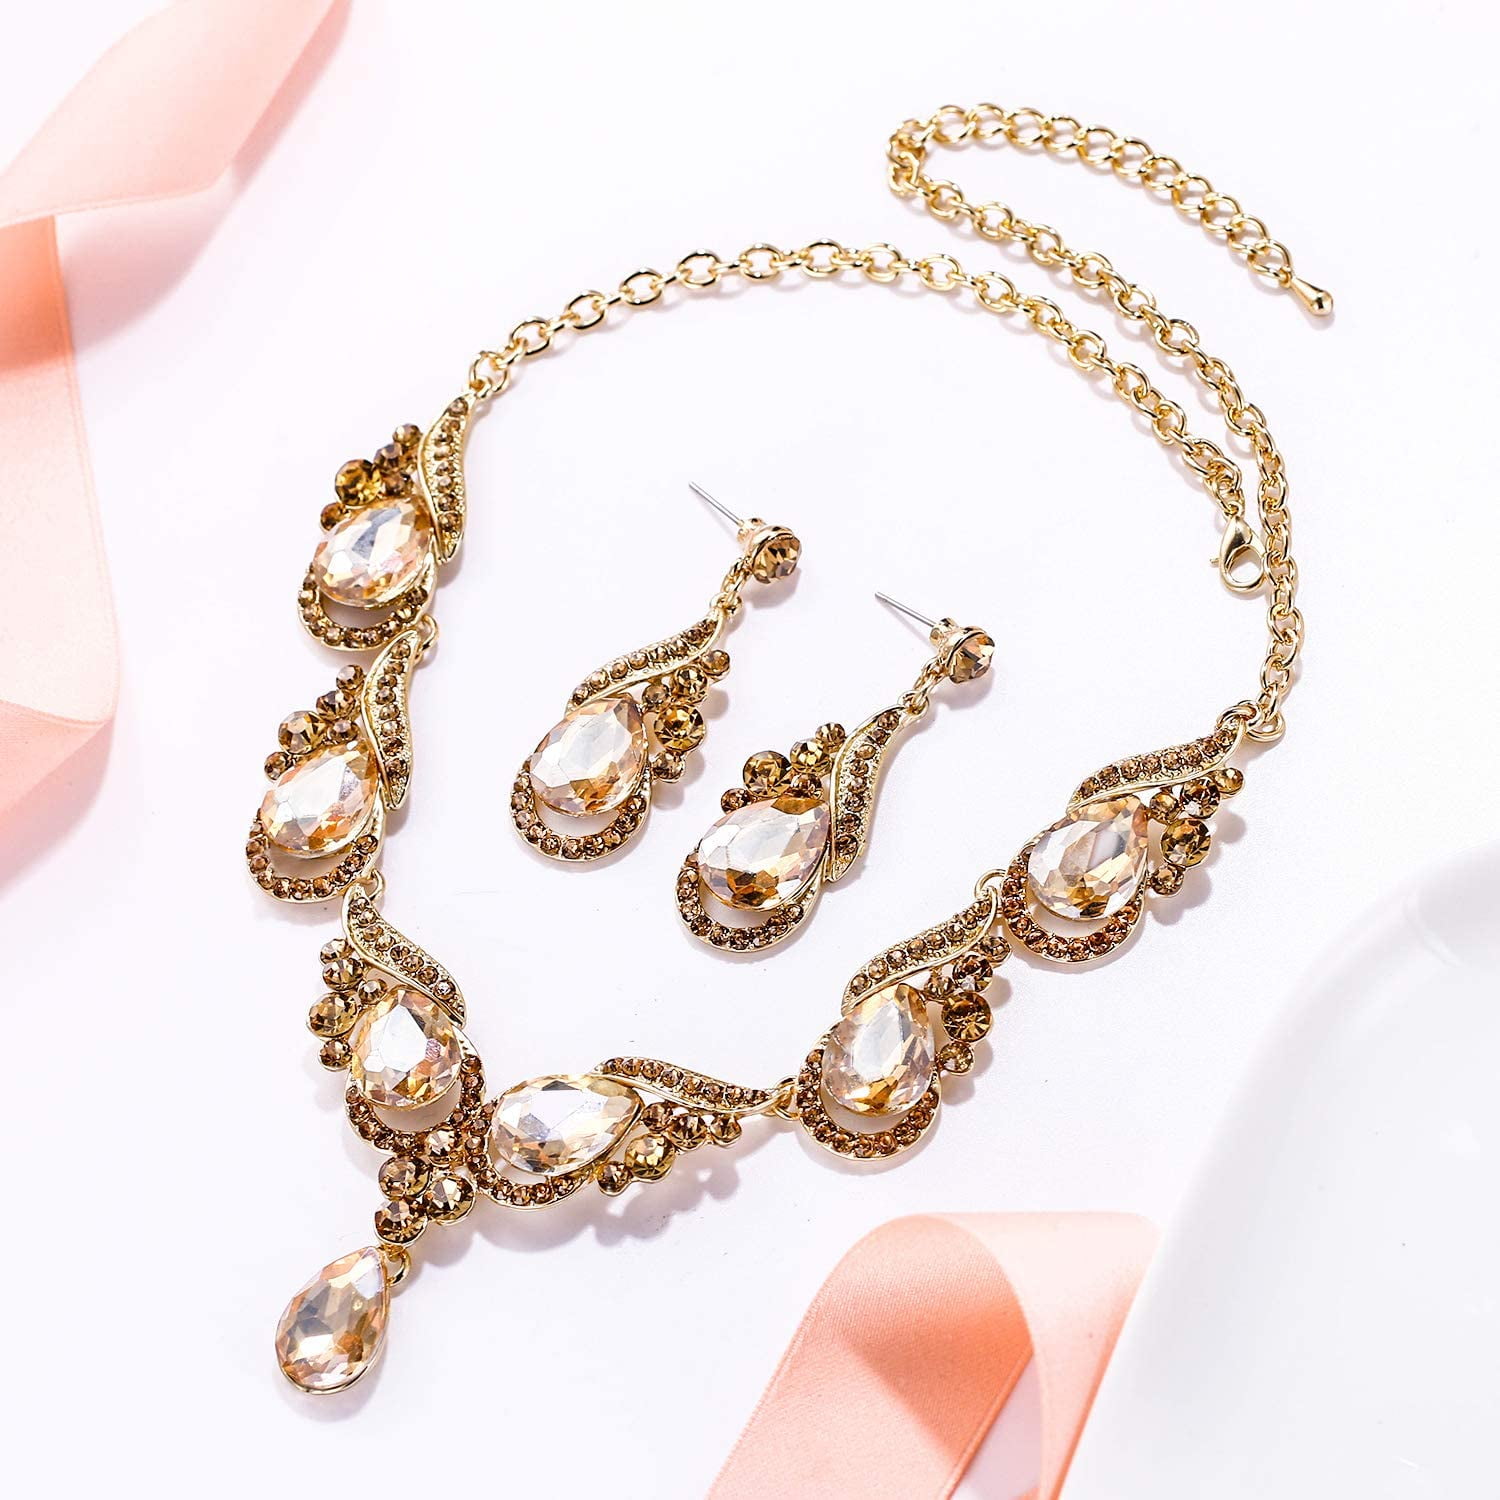 EVER FAITH Womens Crystal Luxury Floral Wave Spindrift Waterdrop Bridal Necklace Earrings Set 